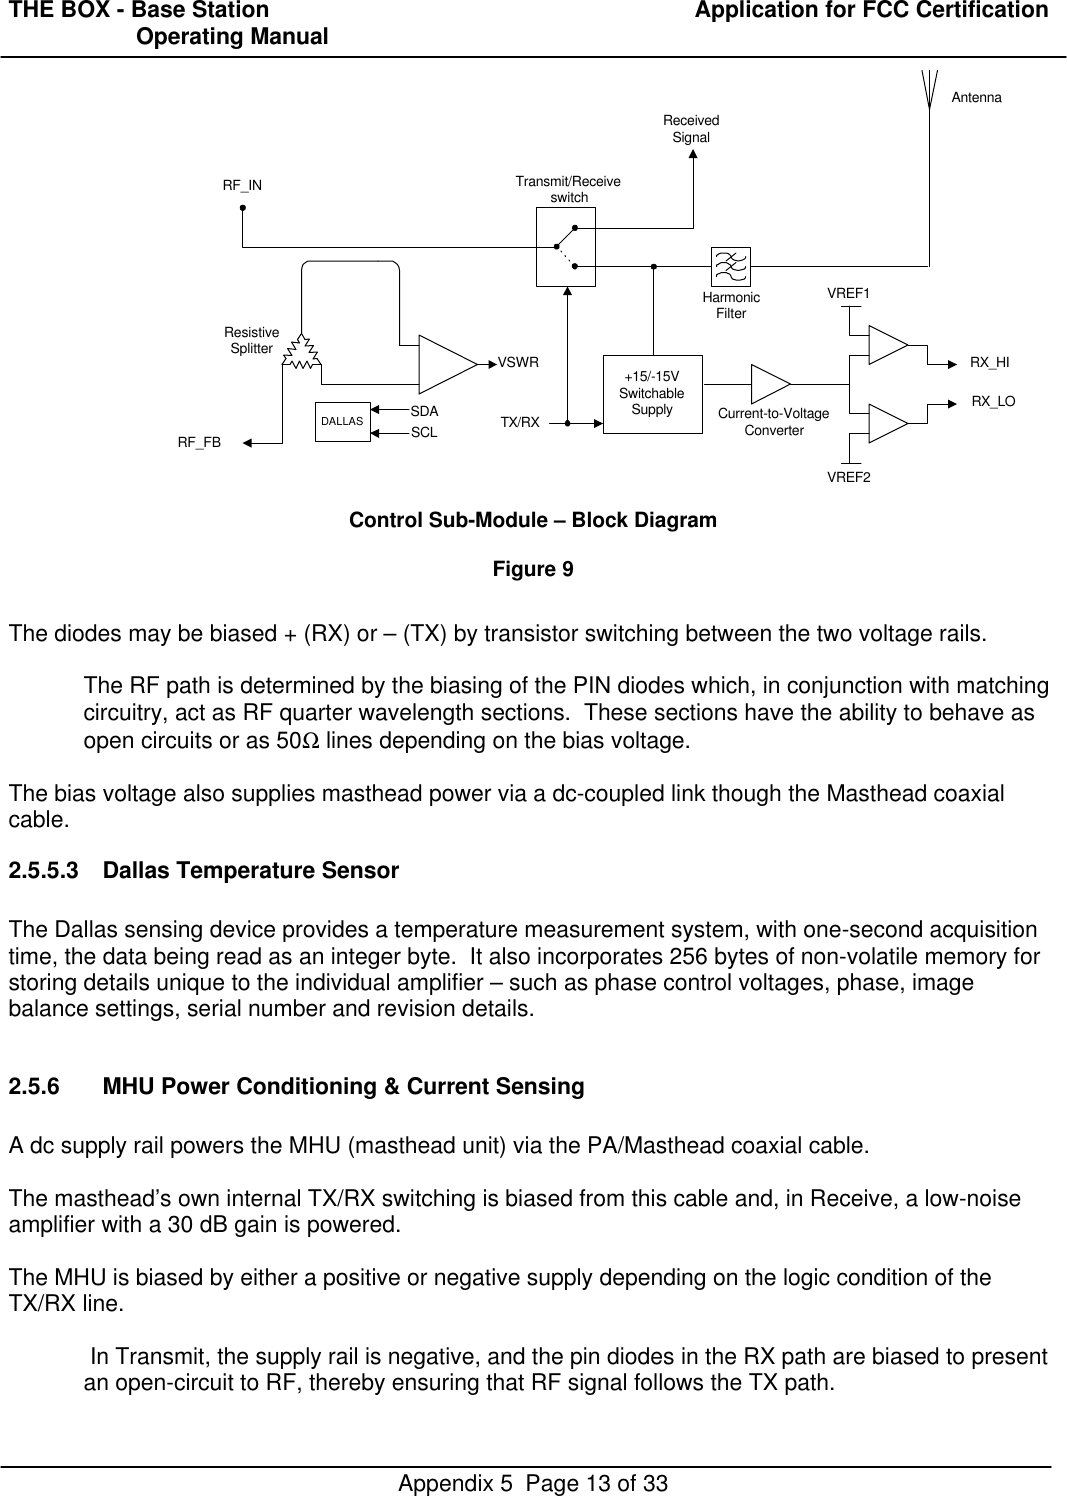 THE BOX - Base Station  Application for FCC Certification                    Operating ManualAppendix 5  Page 13 of 33HarmonicFilter+15/-15VSwitchableSupplyTX/RXAntennaReceivedSignalVREF1VREF2Transmit/ReceiveswitchRF_INResistiveSplitterRF_FBRX_HIRX_LOCurrent-to-VoltageConverterVSWRDALLAS SDASCLControl Sub-Module – Block DiagramFigure 9The diodes may be biased + (RX) or – (TX) by transistor switching between the two voltage rails.The RF path is determined by the biasing of the PIN diodes which, in conjunction with matchingcircuitry, act as RF quarter wavelength sections.  These sections have the ability to behave asopen circuits or as 50Ω lines depending on the bias voltage.The bias voltage also supplies masthead power via a dc-coupled link though the Masthead coaxialcable.2.5.5.3 Dallas Temperature SensorThe Dallas sensing device provides a temperature measurement system, with one-second acquisitiontime, the data being read as an integer byte.  It also incorporates 256 bytes of non-volatile memory forstoring details unique to the individual amplifier – such as phase control voltages, phase, imagebalance settings, serial number and revision details.2.5.6 MHU Power Conditioning &amp; Current SensingA dc supply rail powers the MHU (masthead unit) via the PA/Masthead coaxial cable.The masthead’s own internal TX/RX switching is biased from this cable and, in Receive, a low-noiseamplifier with a 30 dB gain is powered.The MHU is biased by either a positive or negative supply depending on the logic condition of theTX/RX line.In Transmit, the supply rail is negative, and the pin diodes in the RX path are biased to presentan open-circuit to RF, thereby ensuring that RF signal follows the TX path.